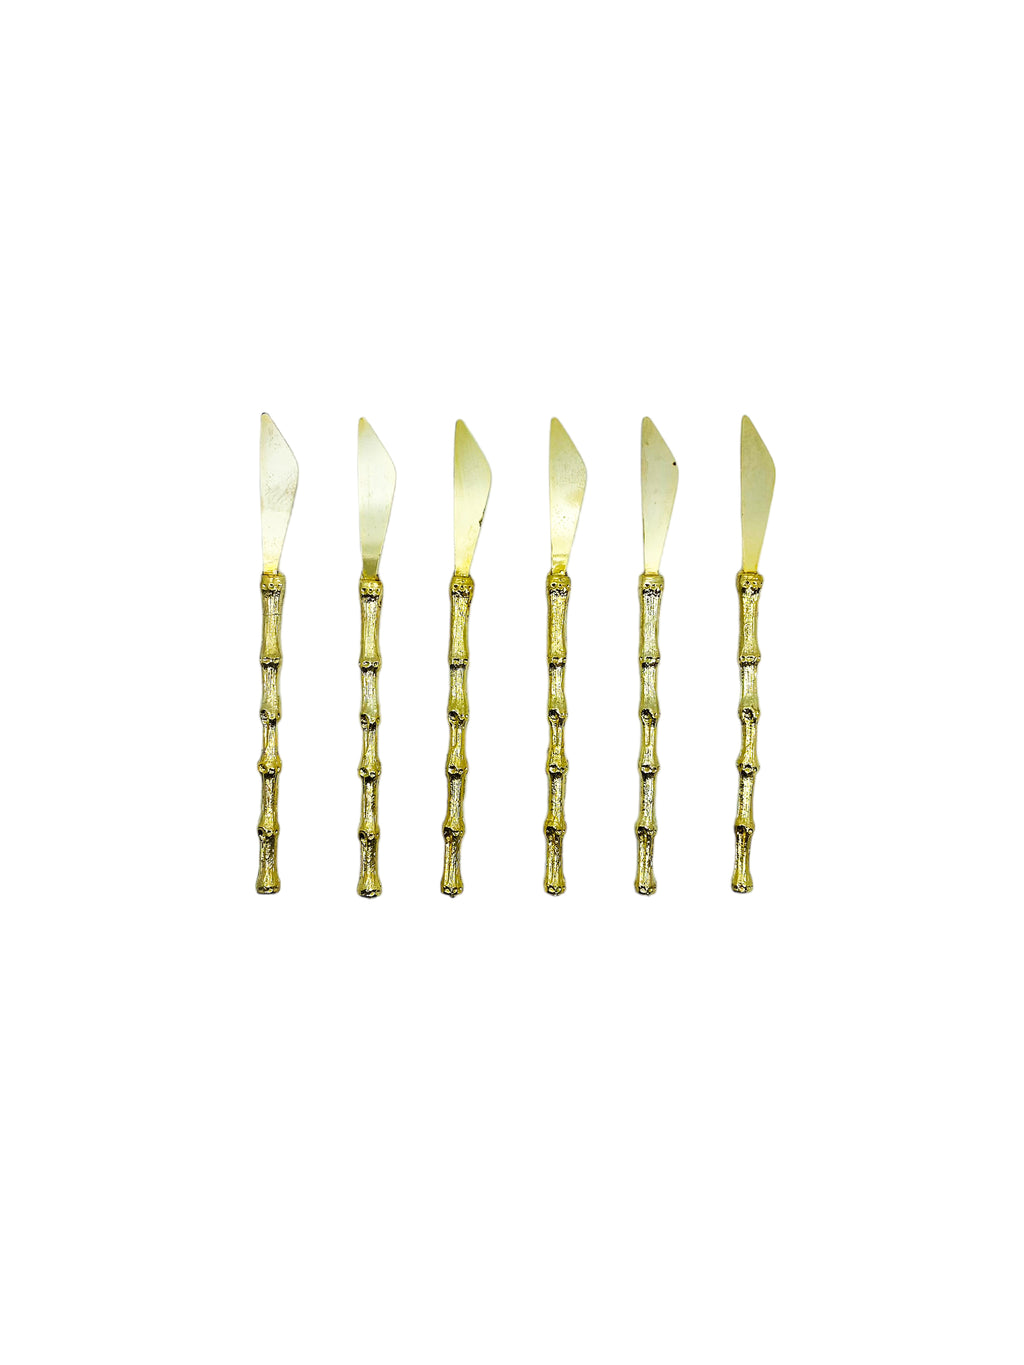 Vintage 22kt Gold Plated Bamboo Handle Party Knives, Set of 6